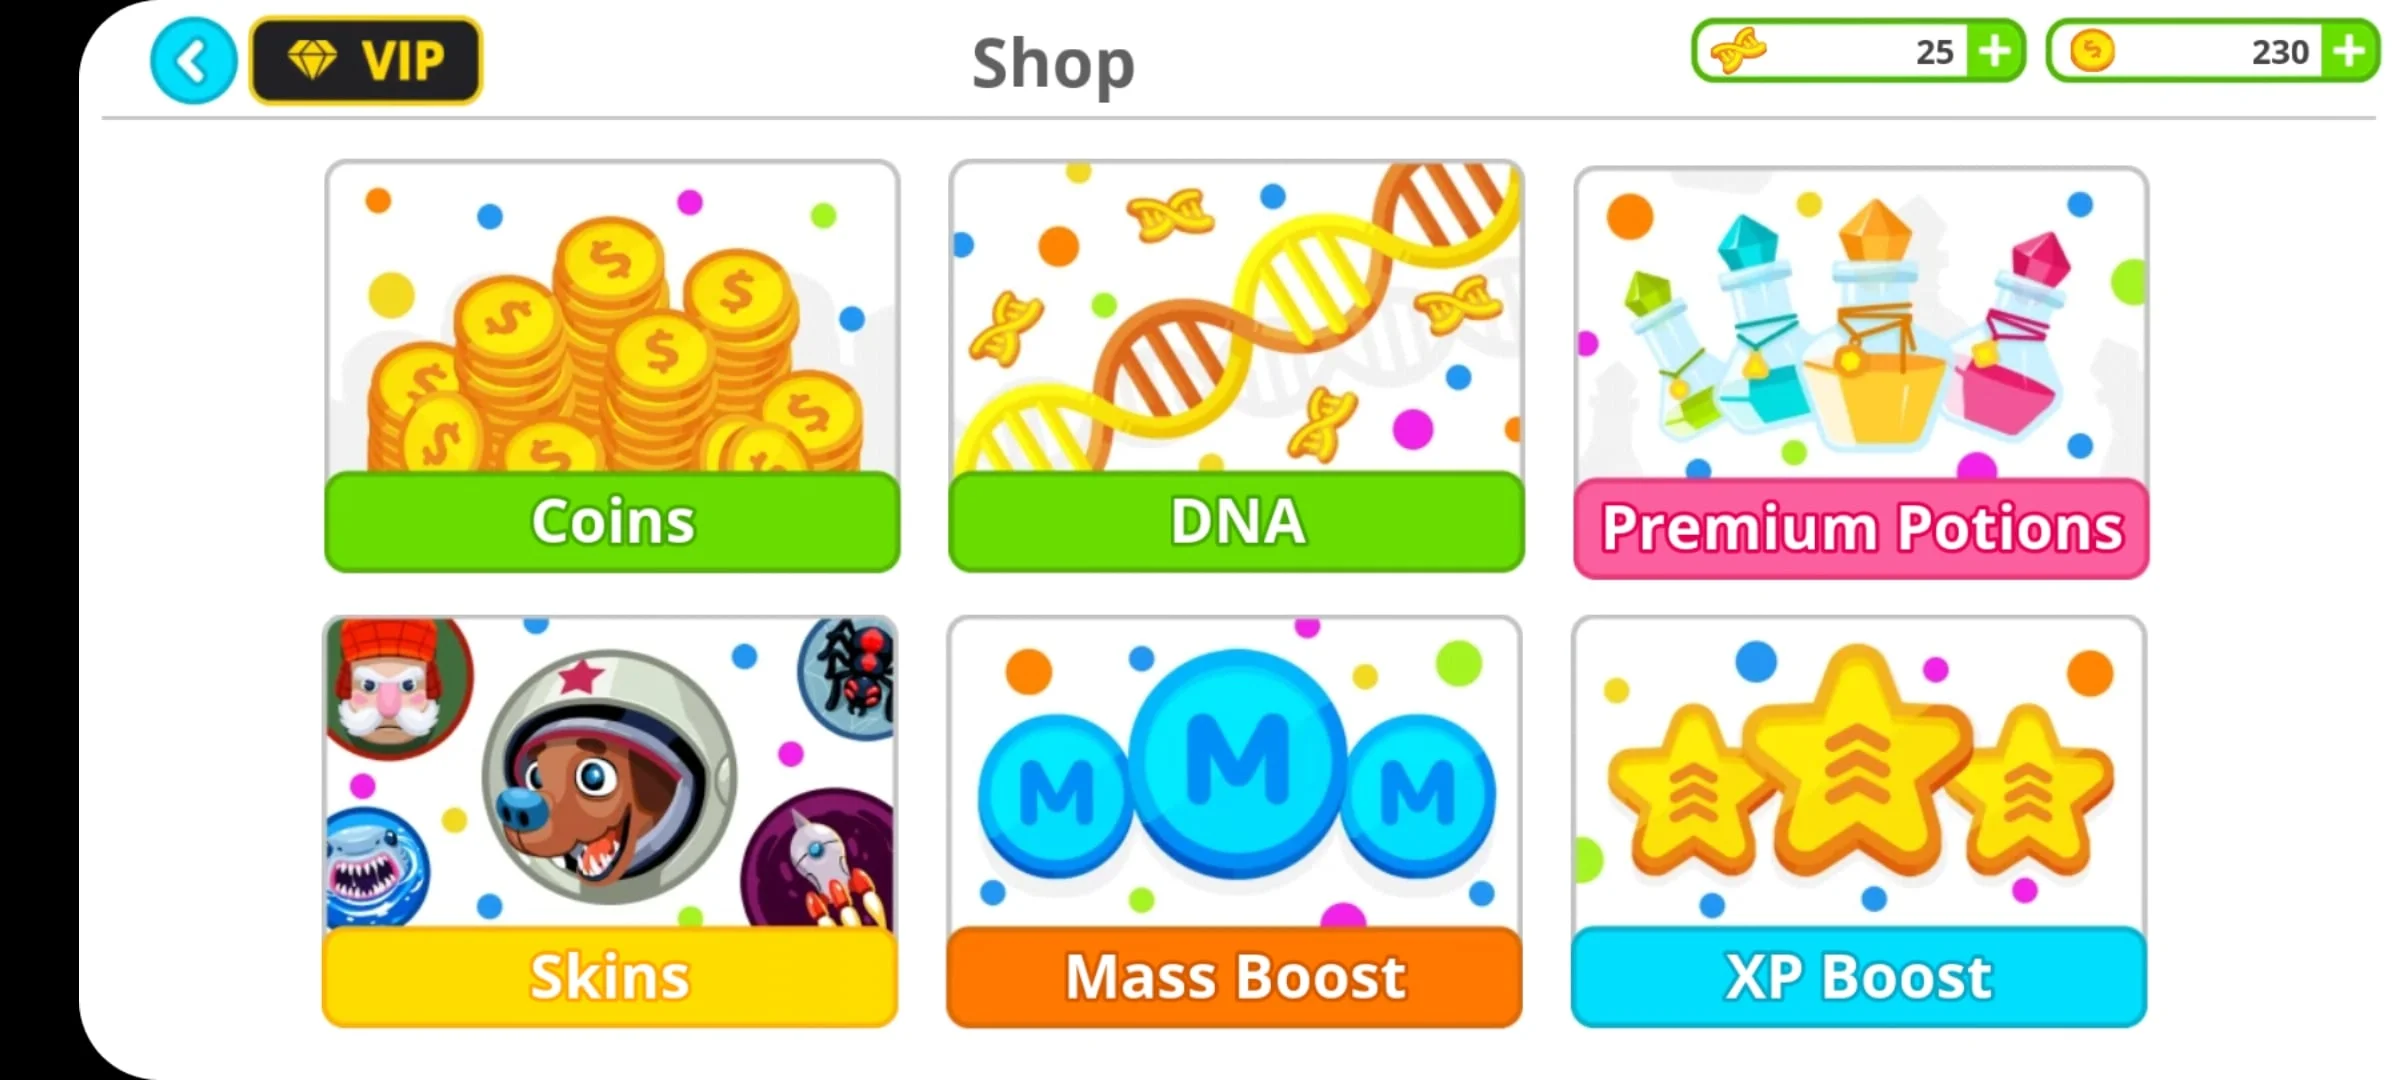 Agar io Hack - Add Unlimited Coins, Triple Starting Mass and